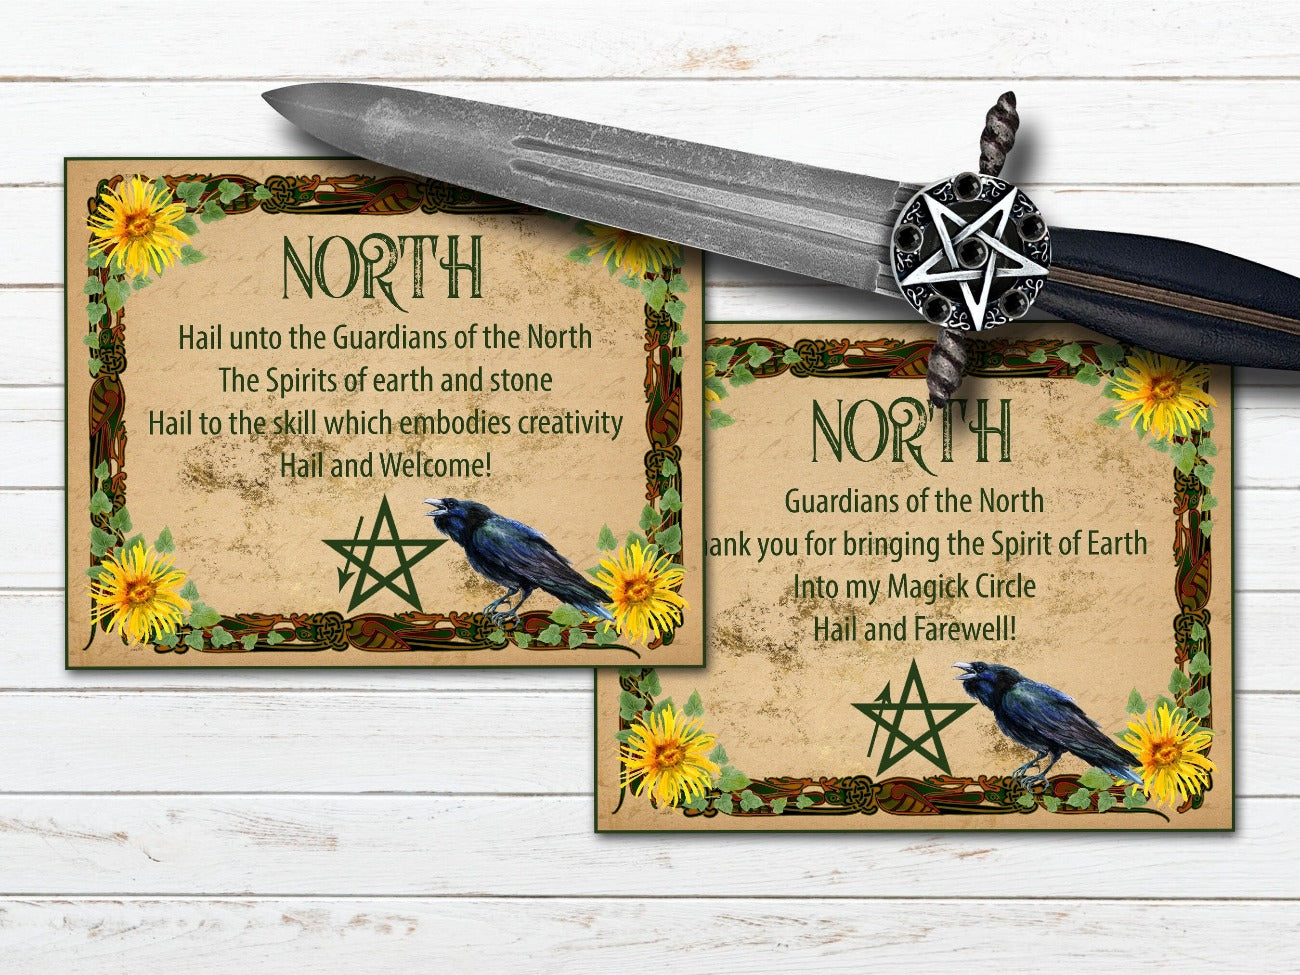 North Invoking and Banishing Quarter Cards. Each card has a floral border with a crow and pentacle with an arrow indicating the correct way to draw it.